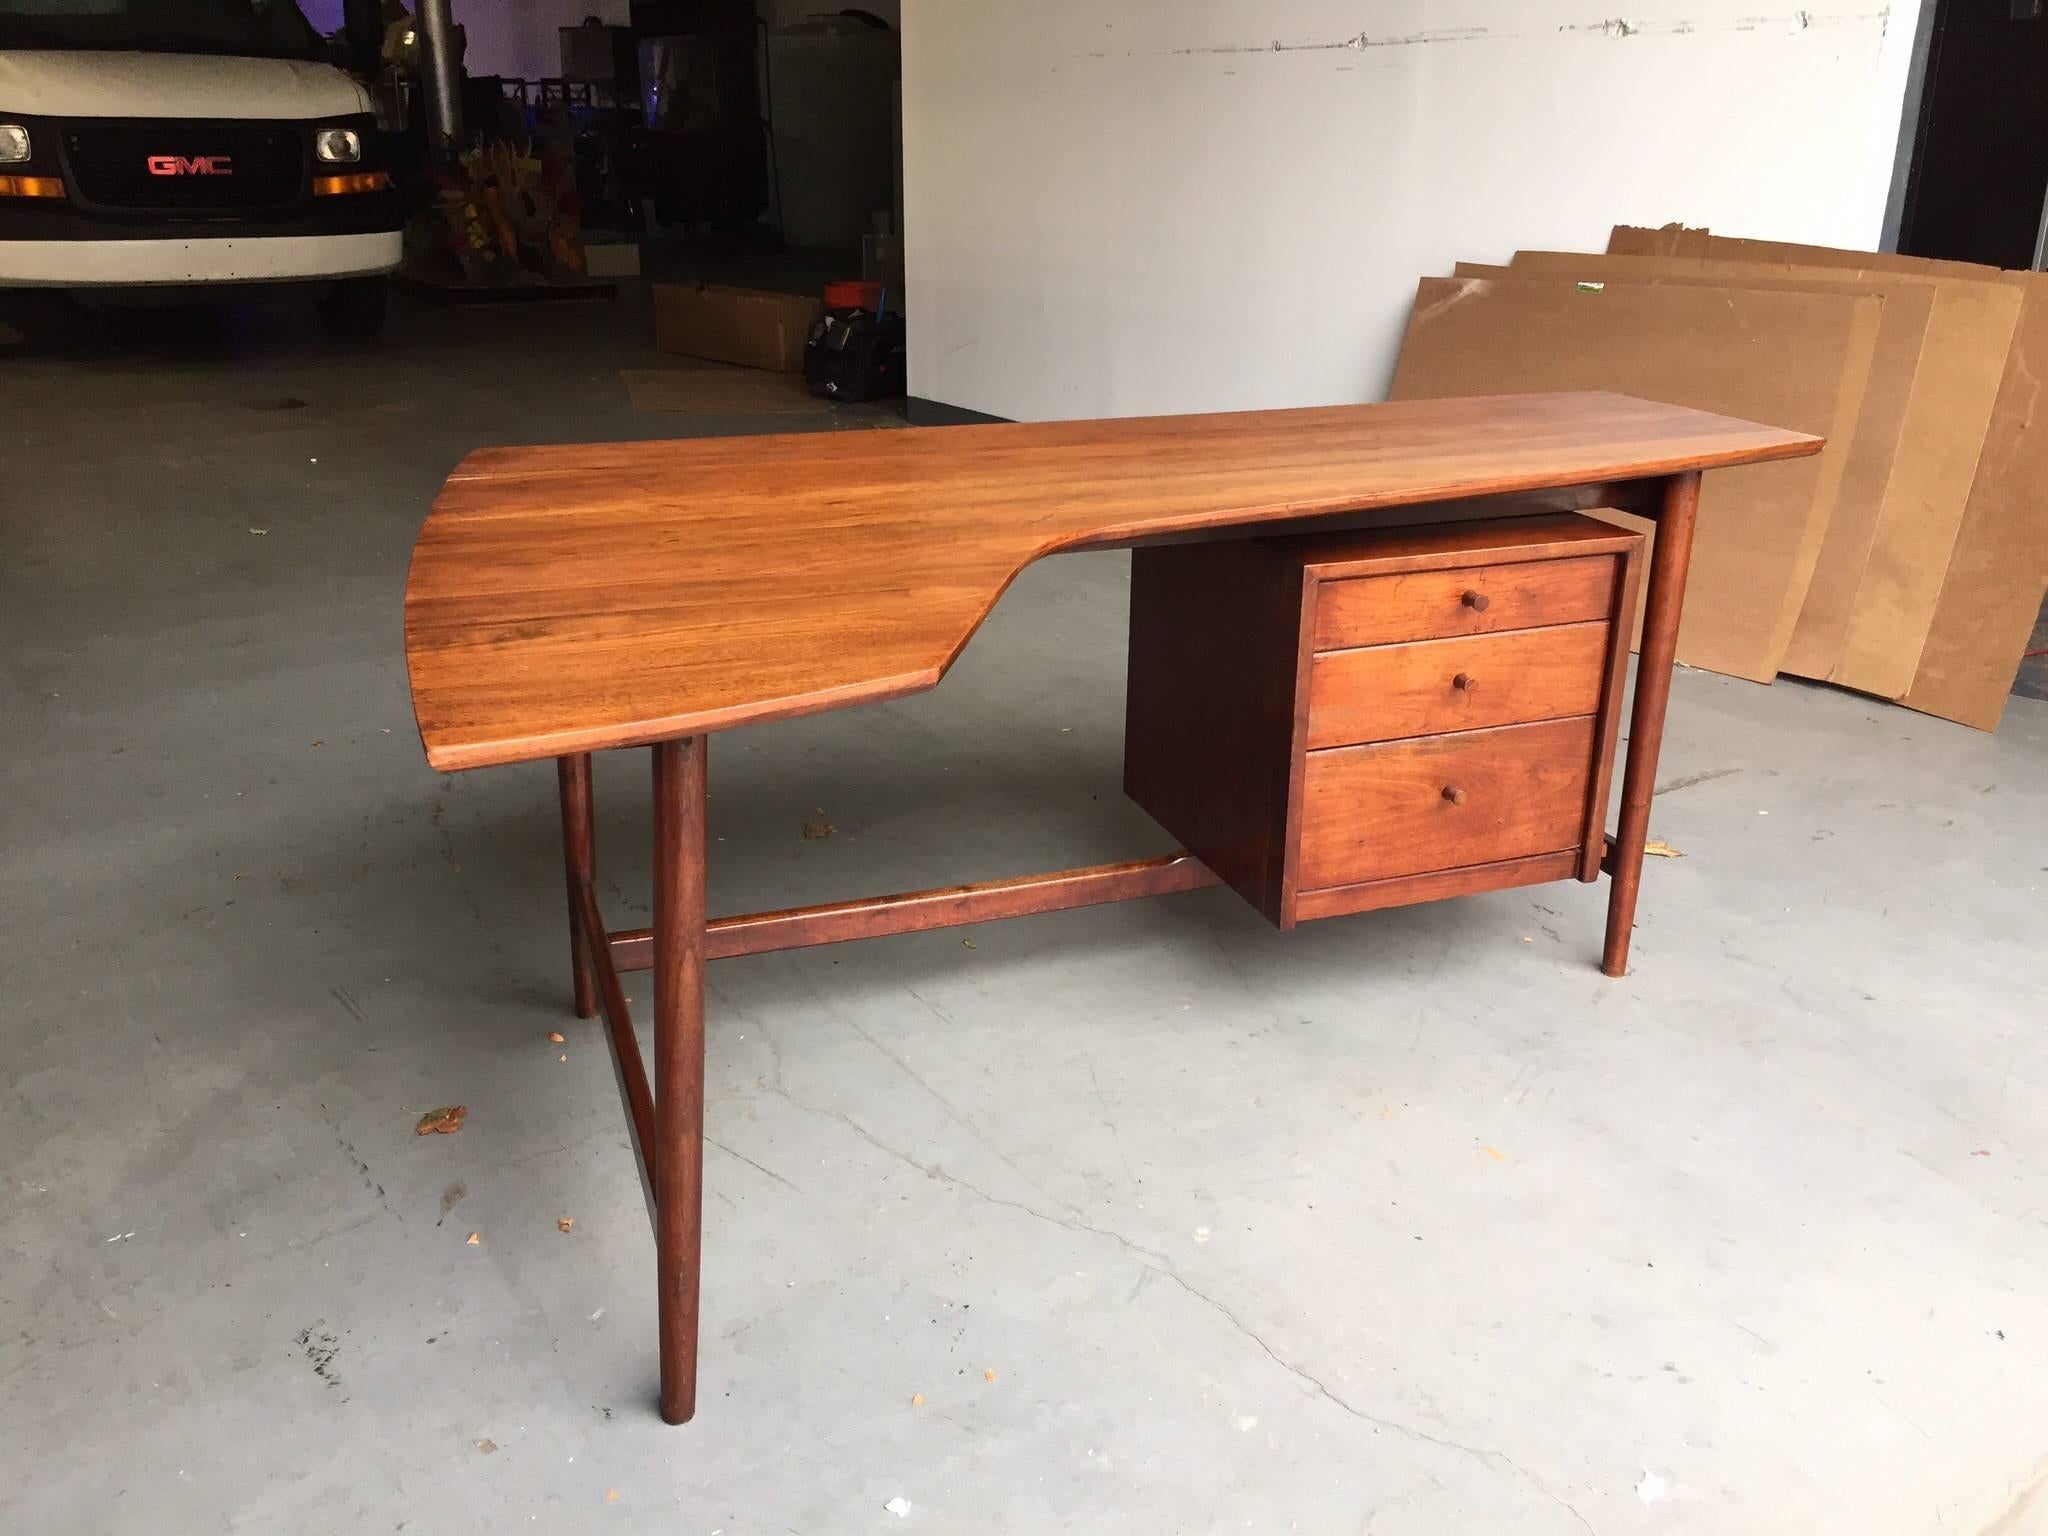 Before becoming on of the most acclaimed and influential artist to emerge out of 1960s NYC, Richard Artschwager designed and built custom furniture. This desk was among his signature designs, and a version of it was shown in the influential 1957 New